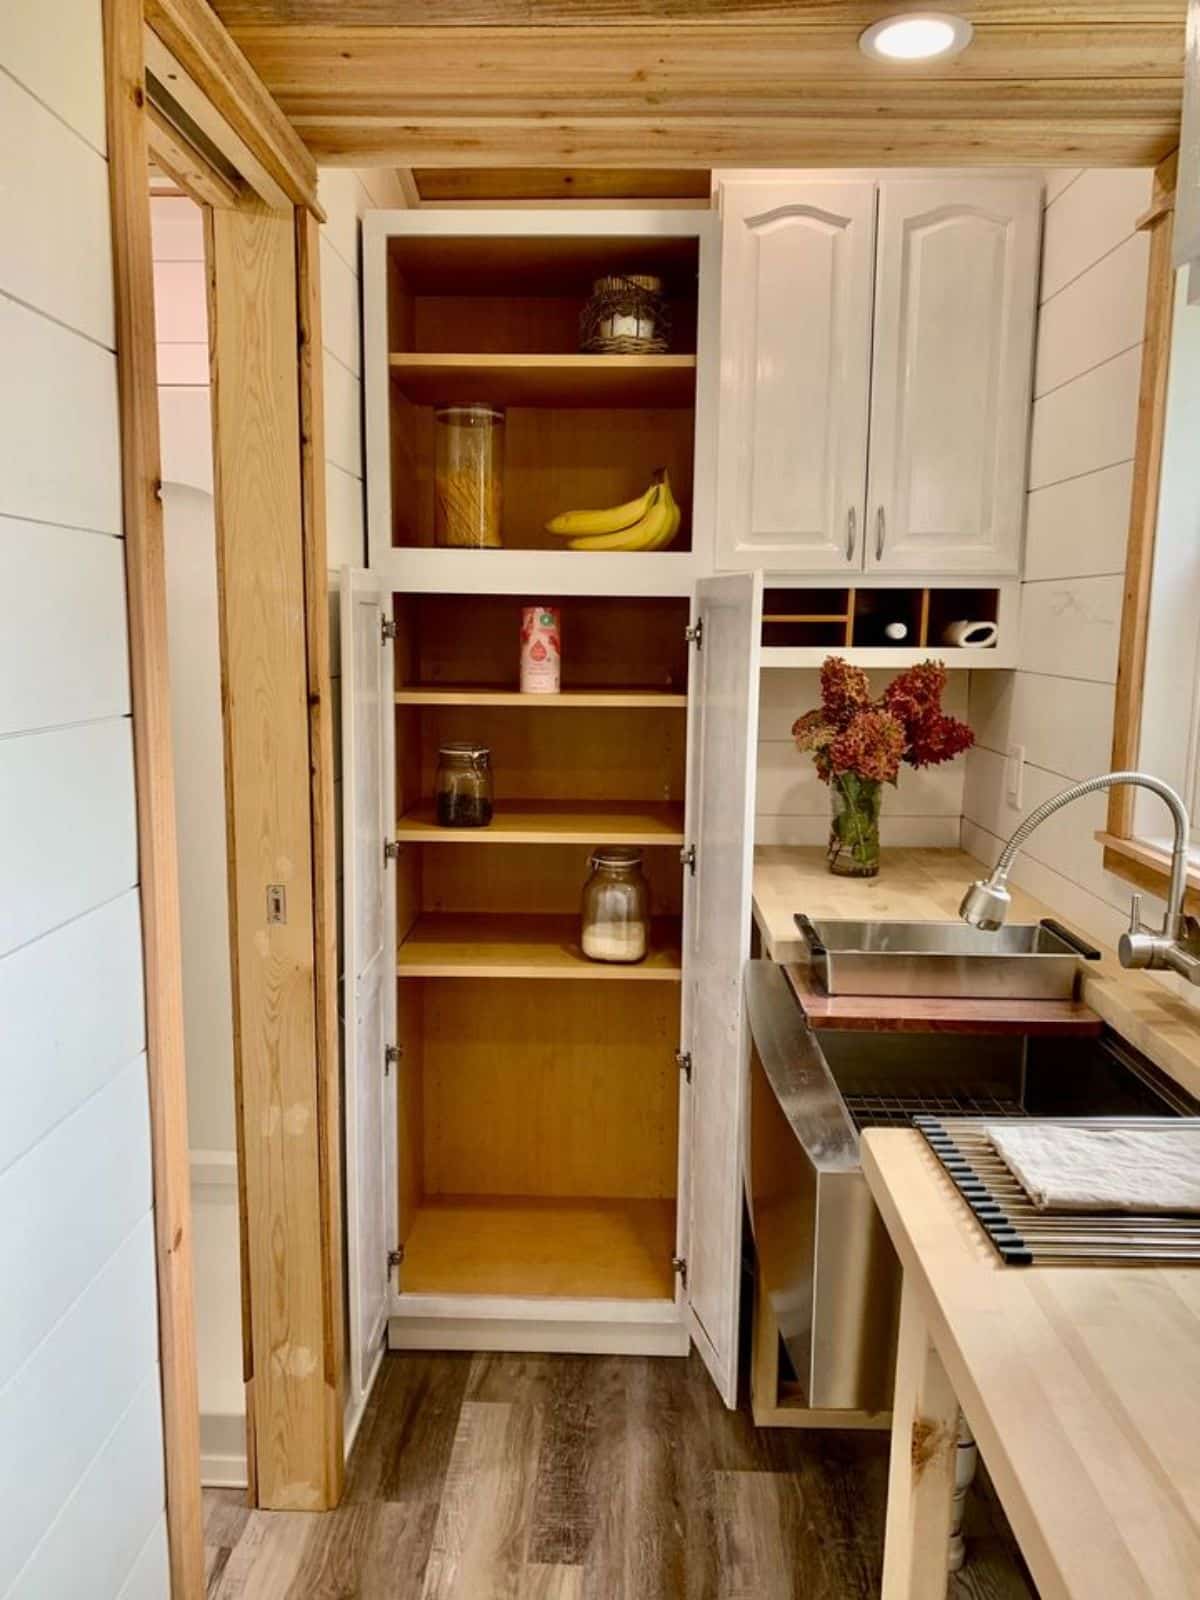 Storage cabinets in kitchen area of 20’ tiny home